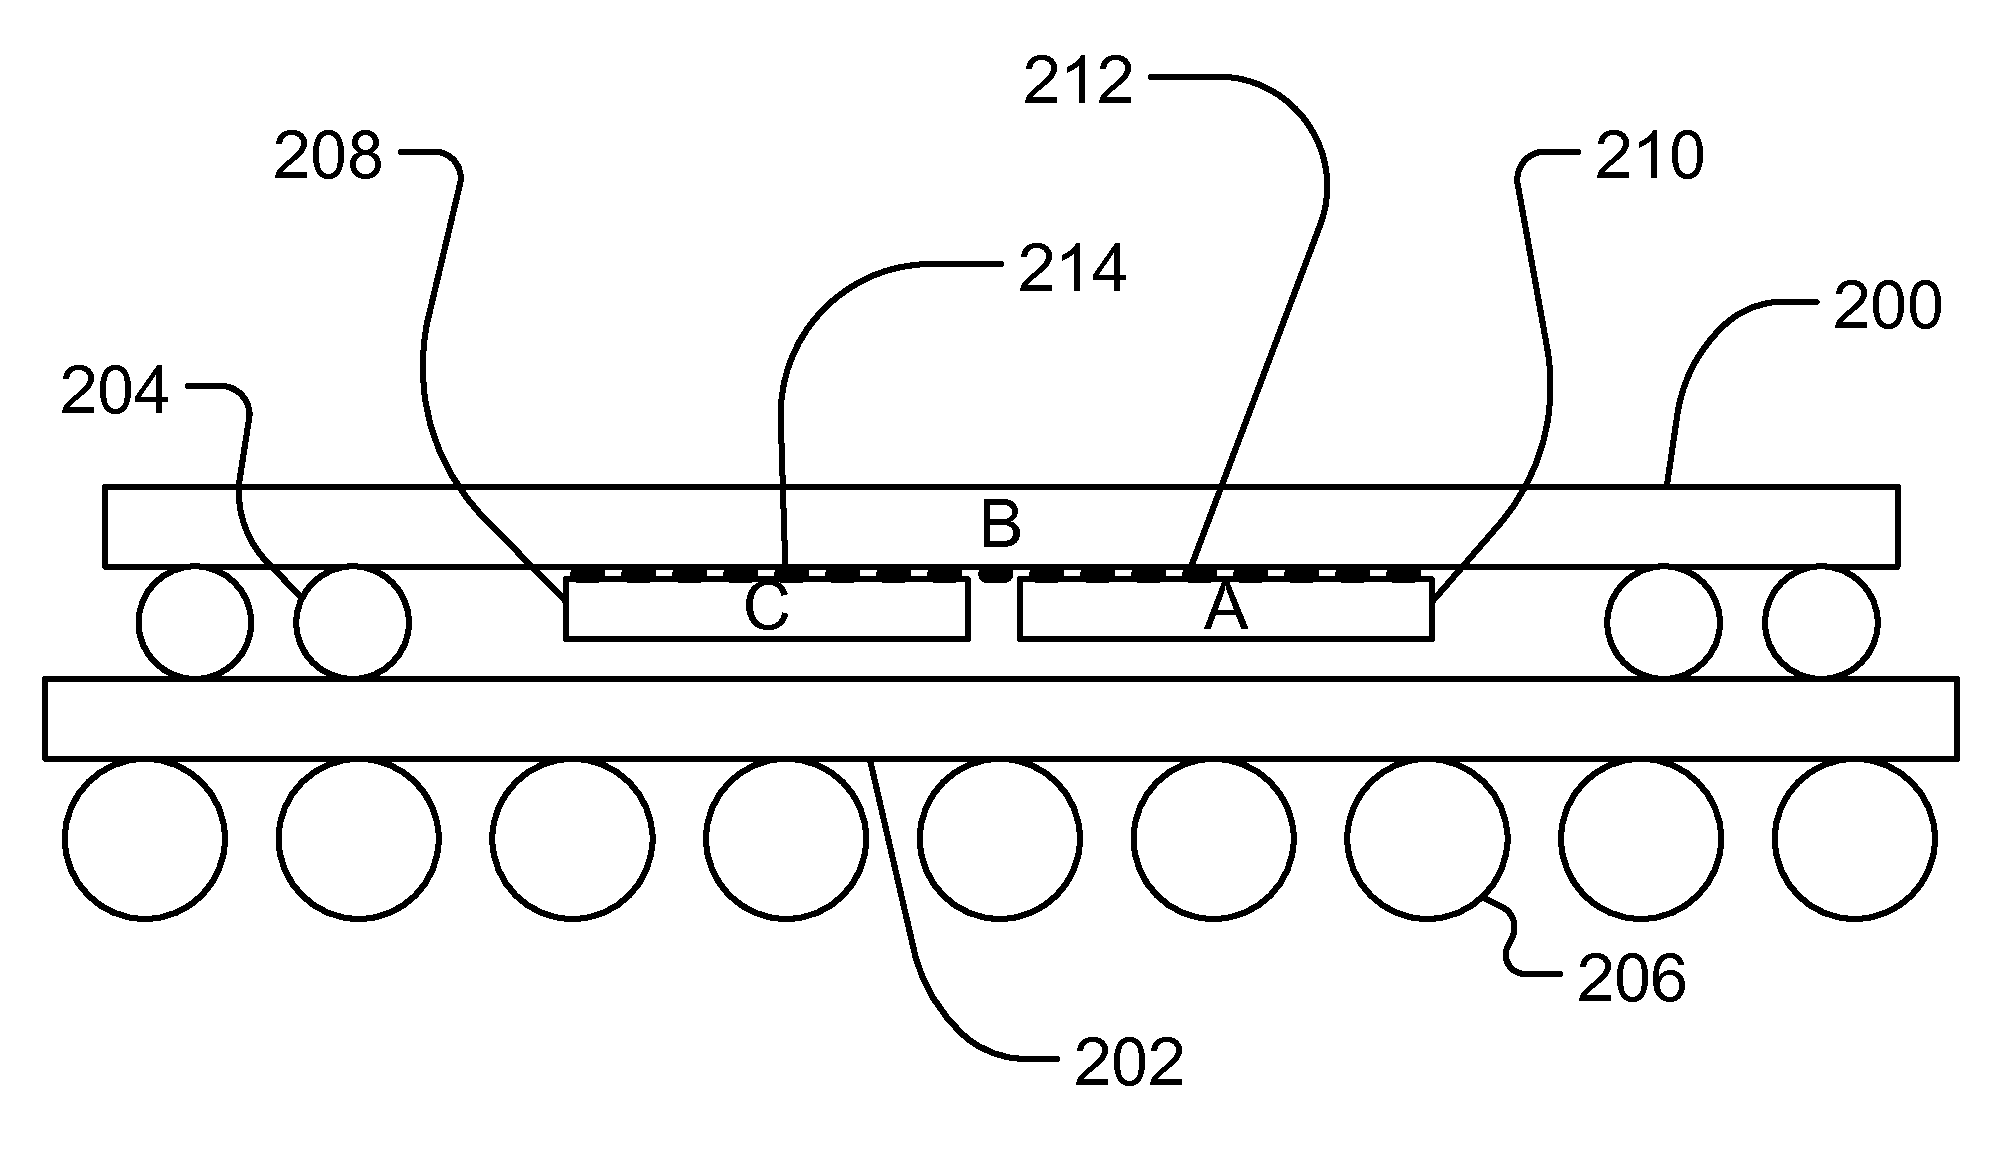 Massively parallel interconnect fabric for complex semiconductor devices